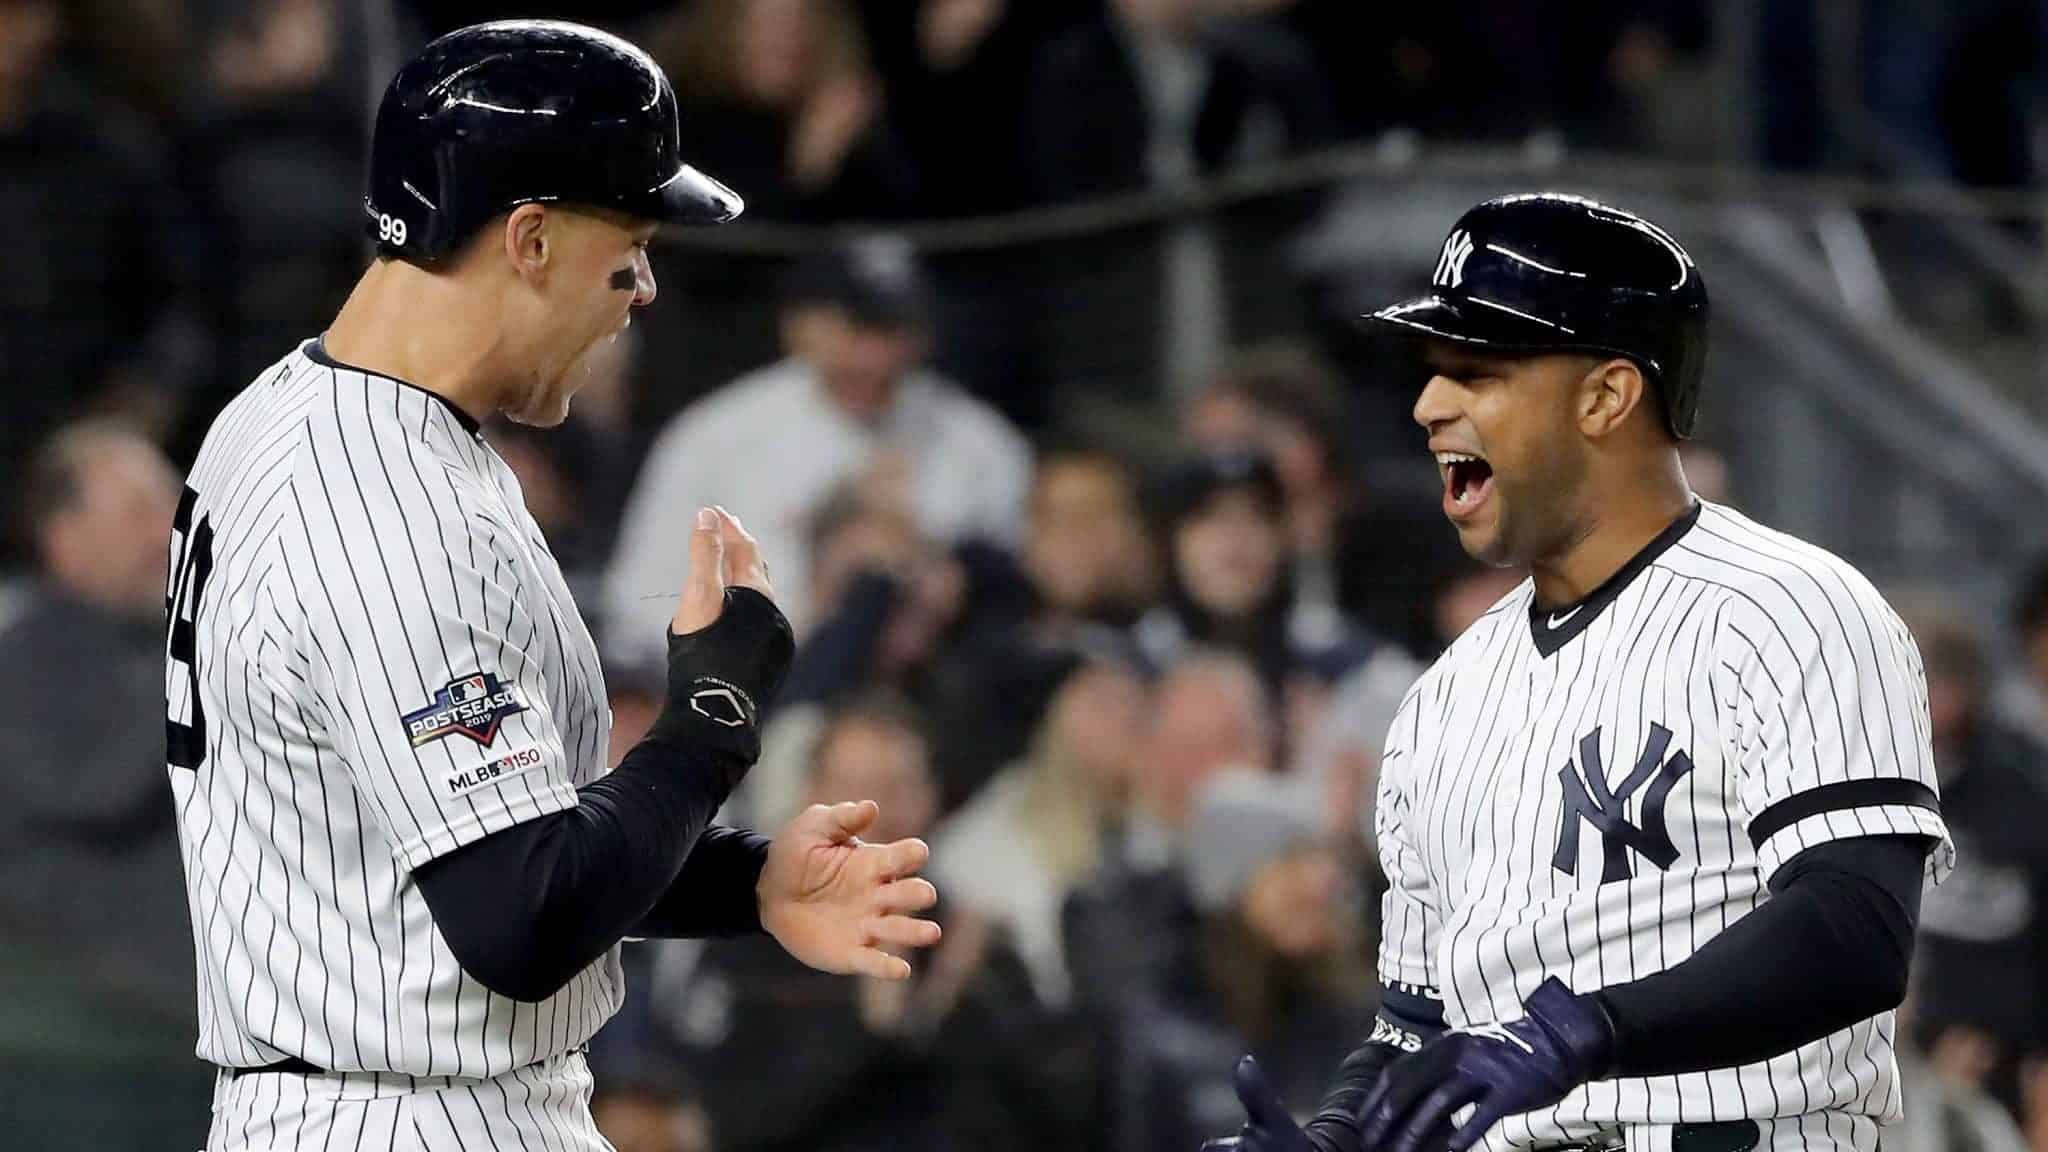 NEW YORK, NEW YORK - OCTOBER 18: Aaron Hicks #31 of the New York Yankees celebrates with Aaron Judge #99 after hitting a three run home run against Justin Verlander #35 of the Houston Astros during the first inning in game five of the American League Championship Series at Yankee Stadium on October 18, 2019 in New York City.